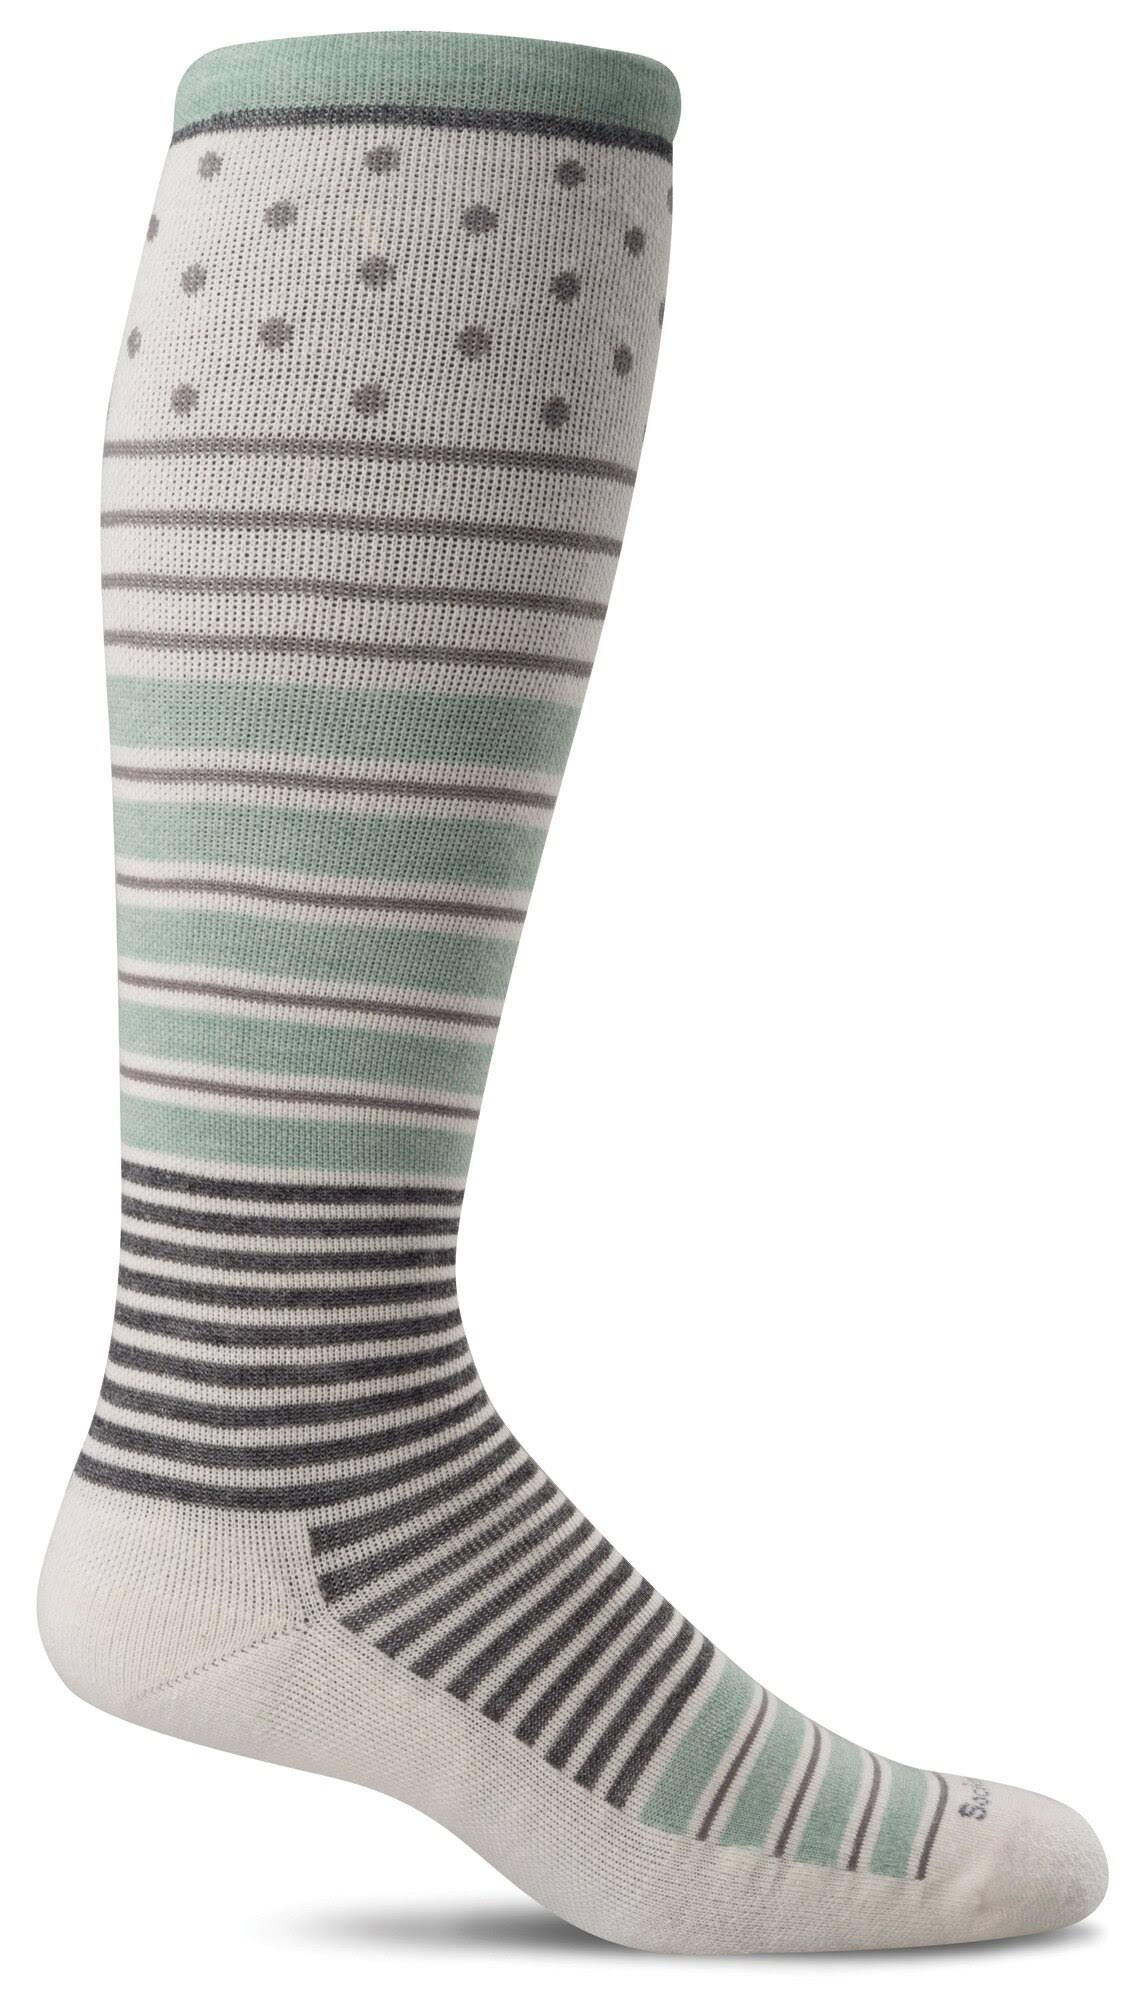 Sockwell Women's Twister Firm Compression Socks S/M / Natural